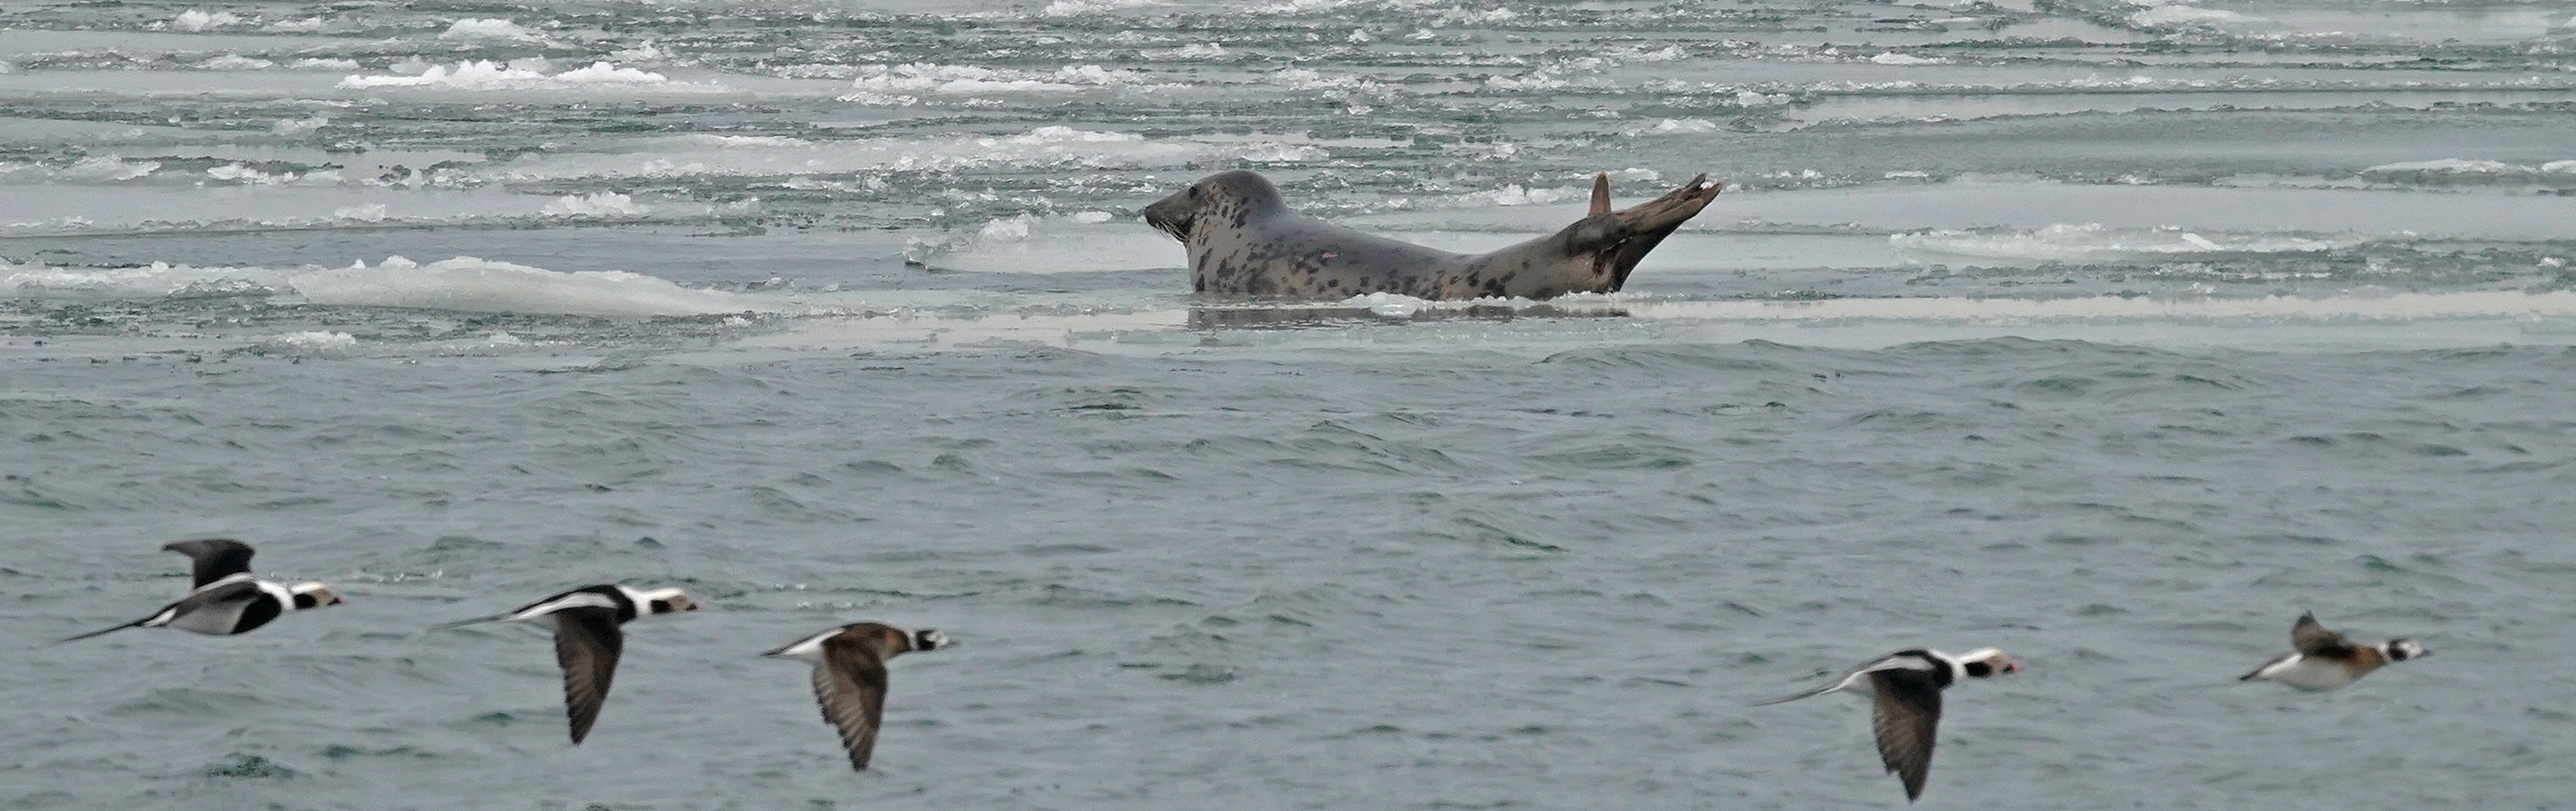 A grey seal on an ice floe, in front of it long-tailed ducks fly by over the open water.